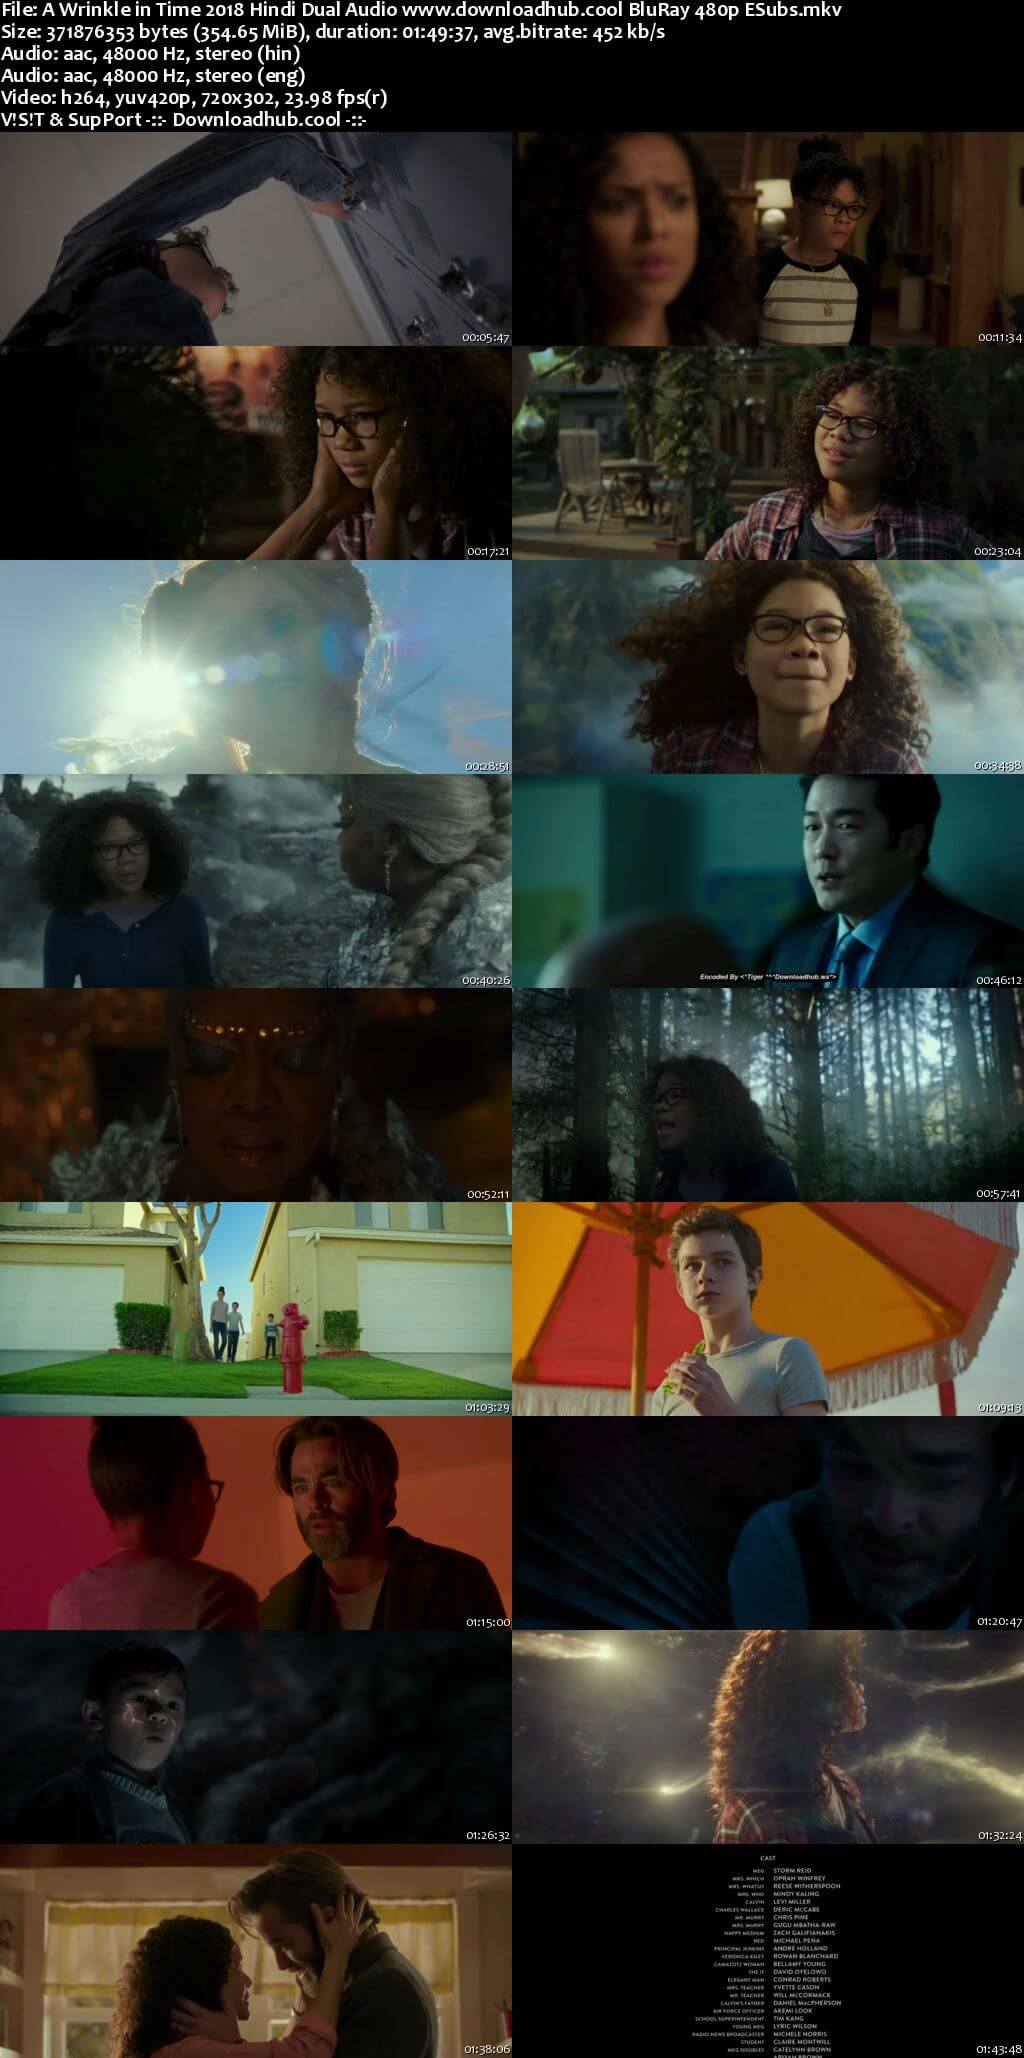 A Wrinkle in Time 2018 Hindi Dual Audio 350MB BluRay 480p ESubs